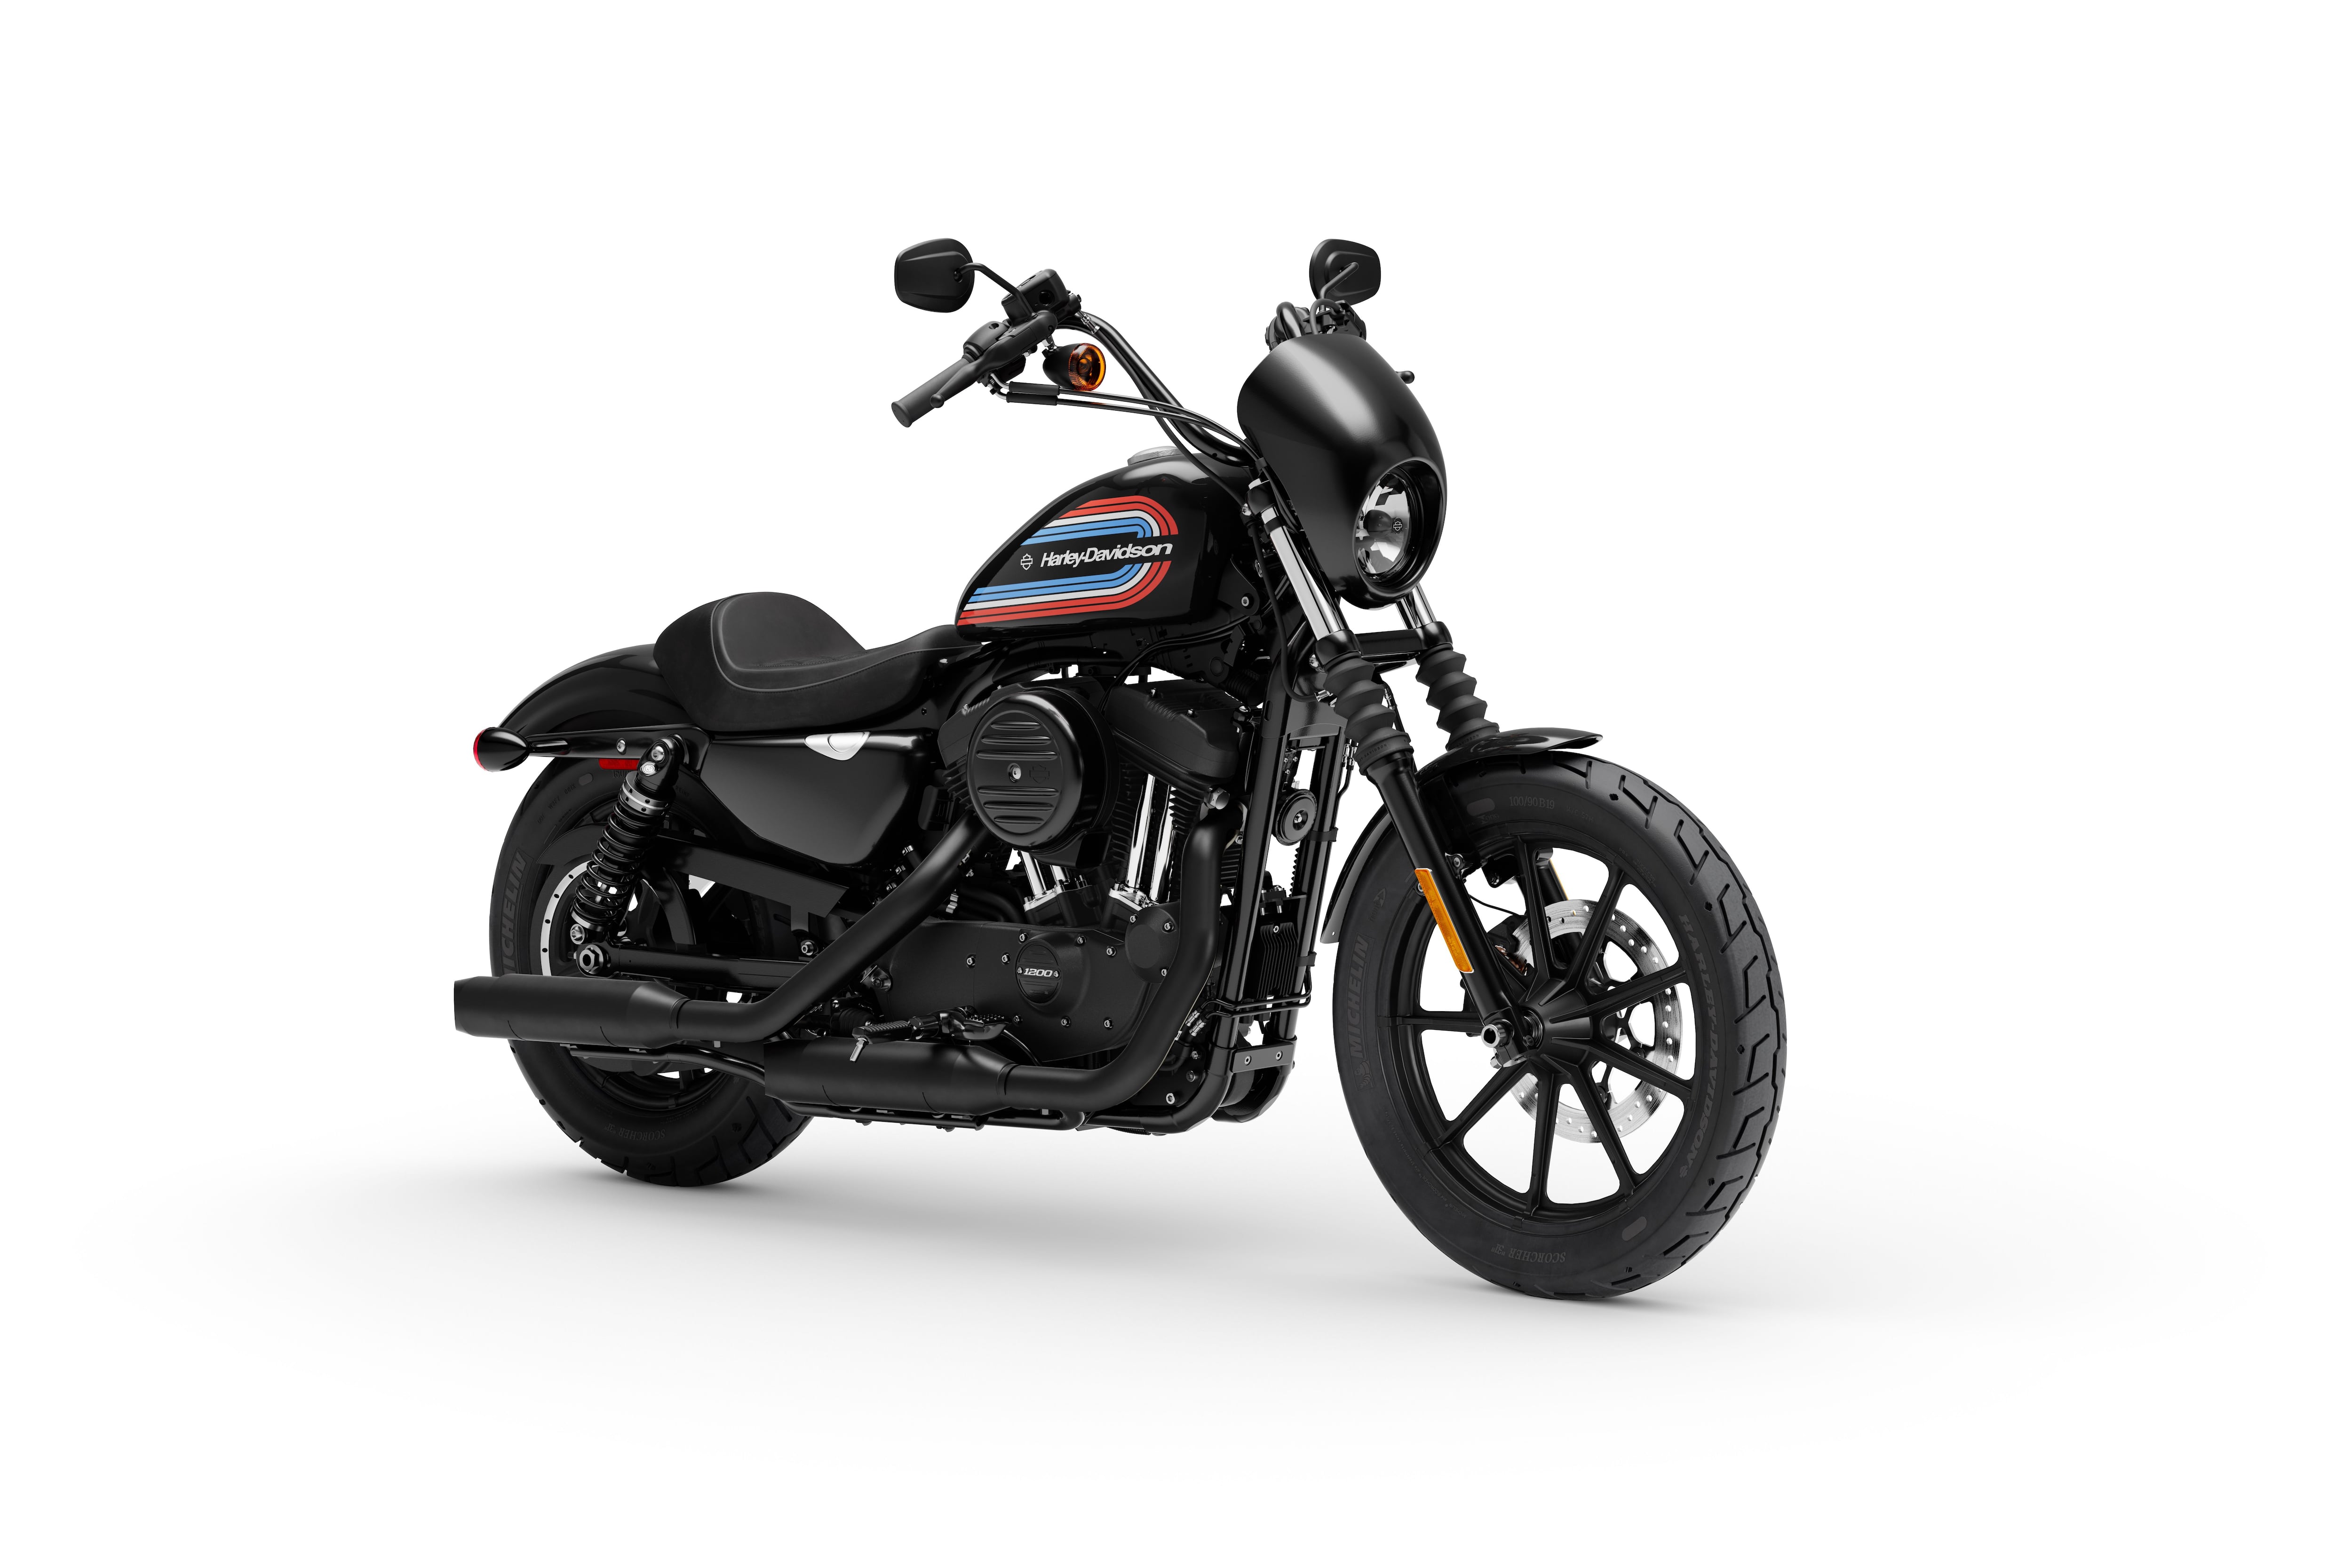 2020 Harley-Davidson Sportster Iron 1200 Buyer's Guide: Specs, Photos,  Price